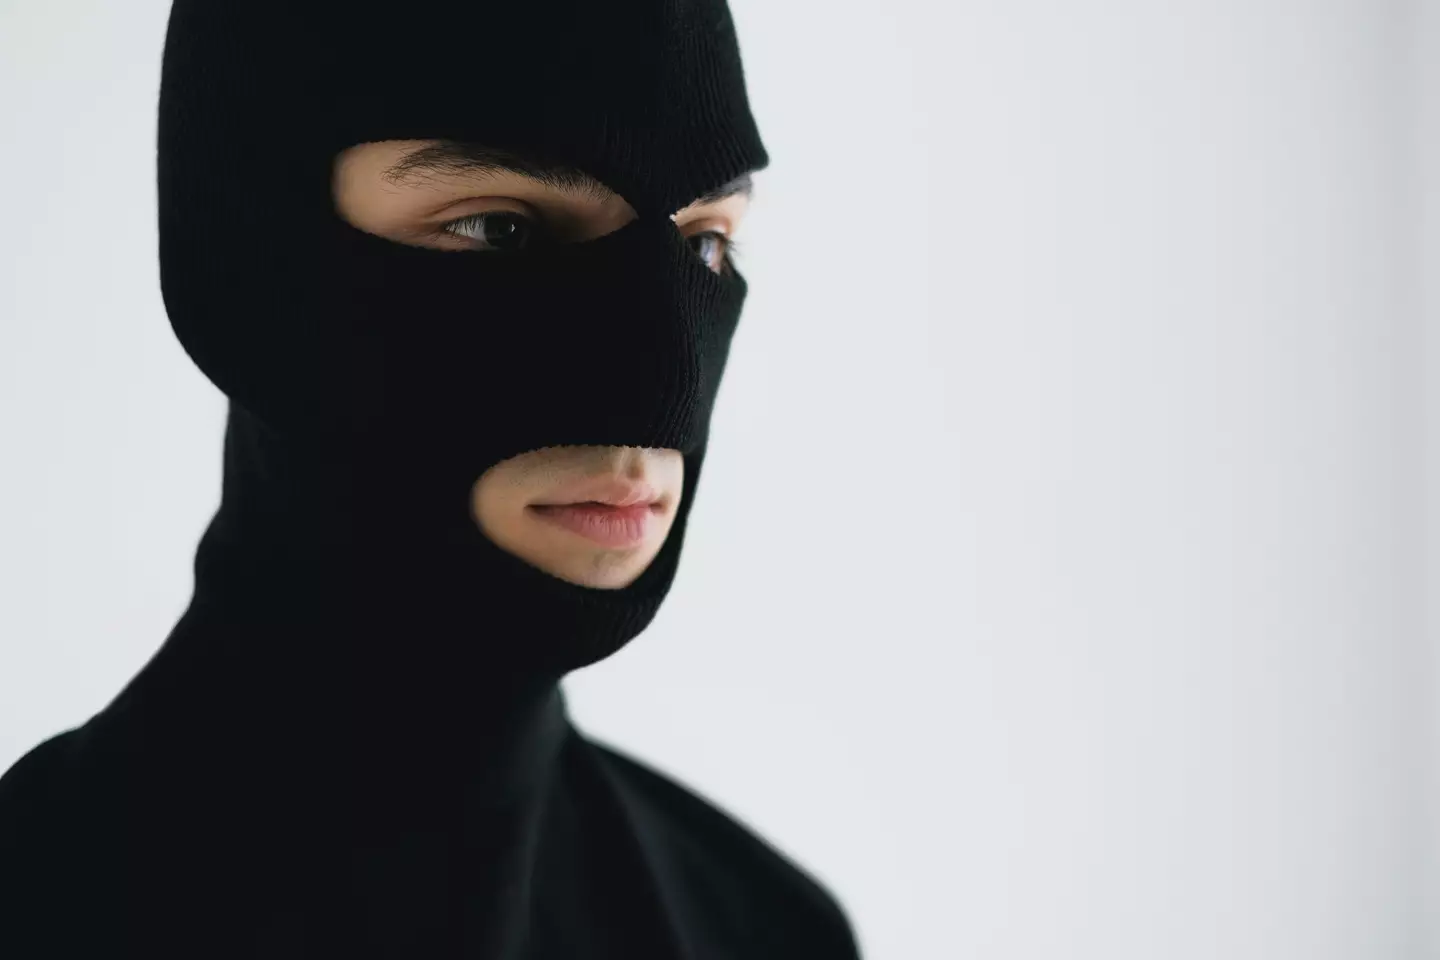 Masks are one factor which can impact an eyewitness identification.